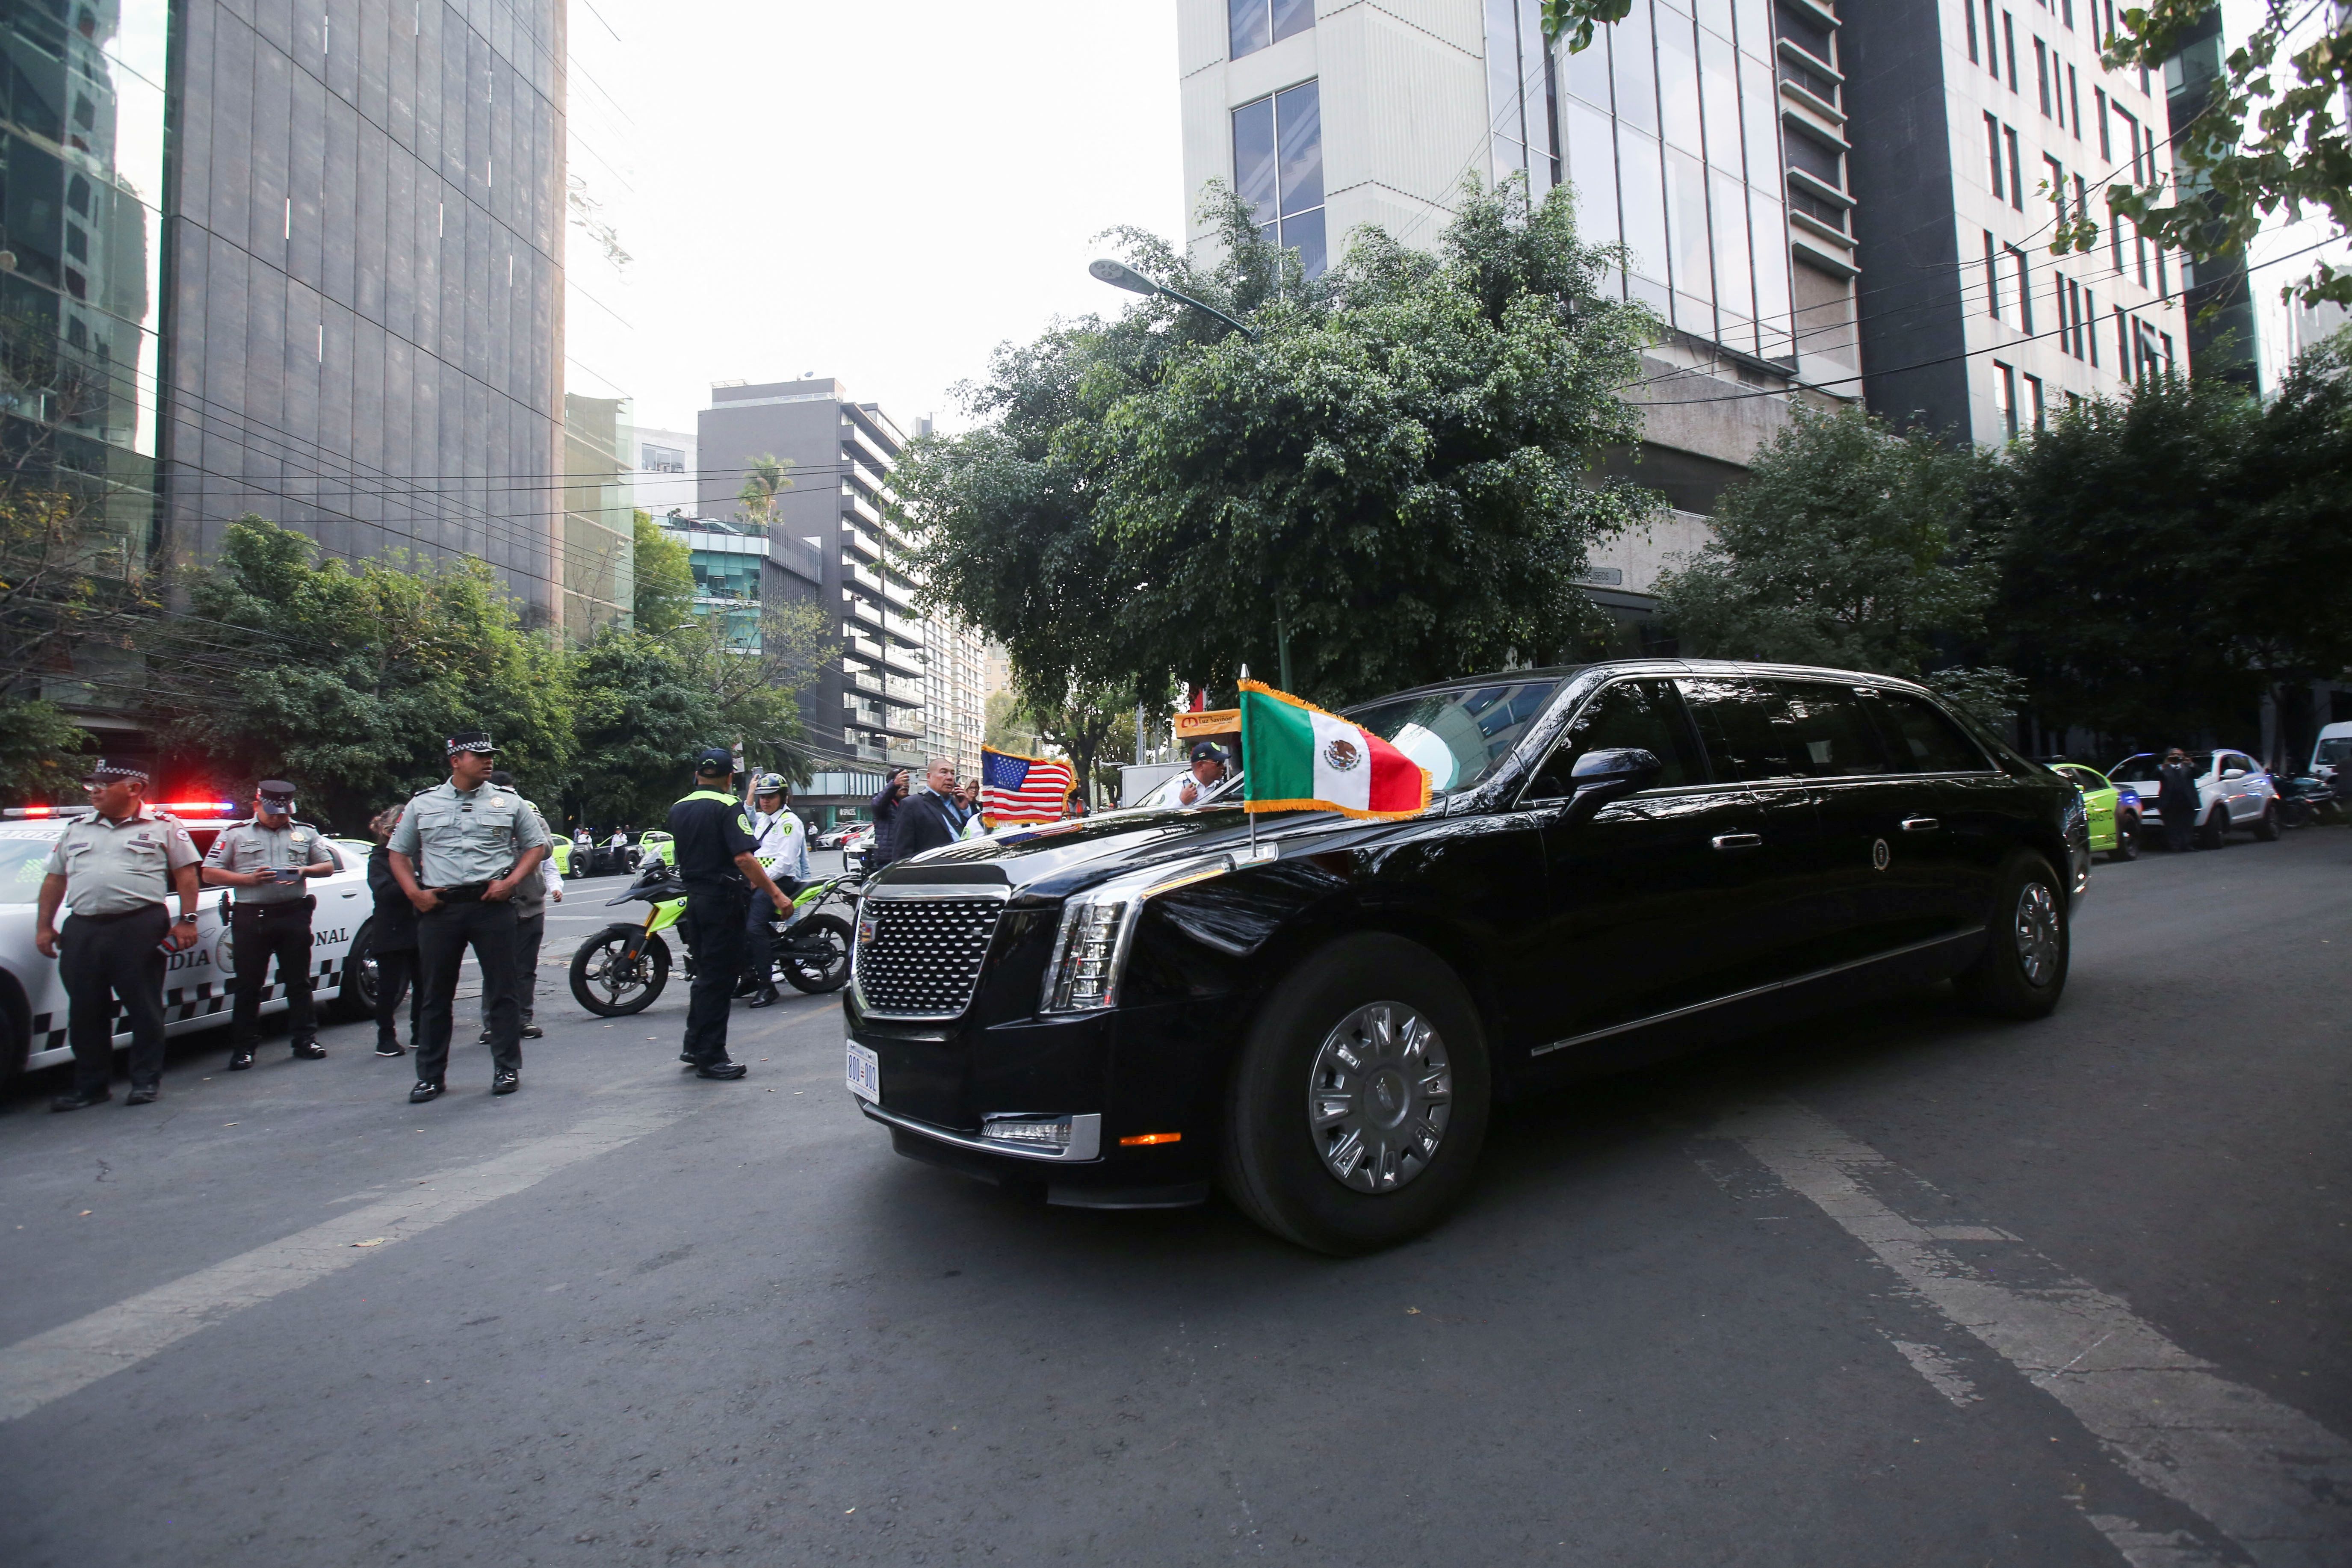 The motorcade of US President Joe Biden leaves his hotel towards the National Palace to attend the North American Leaders' Summit in Mexico City, Mexico January 9, 2023 REUTERS/Quetzalli Niche-Ha